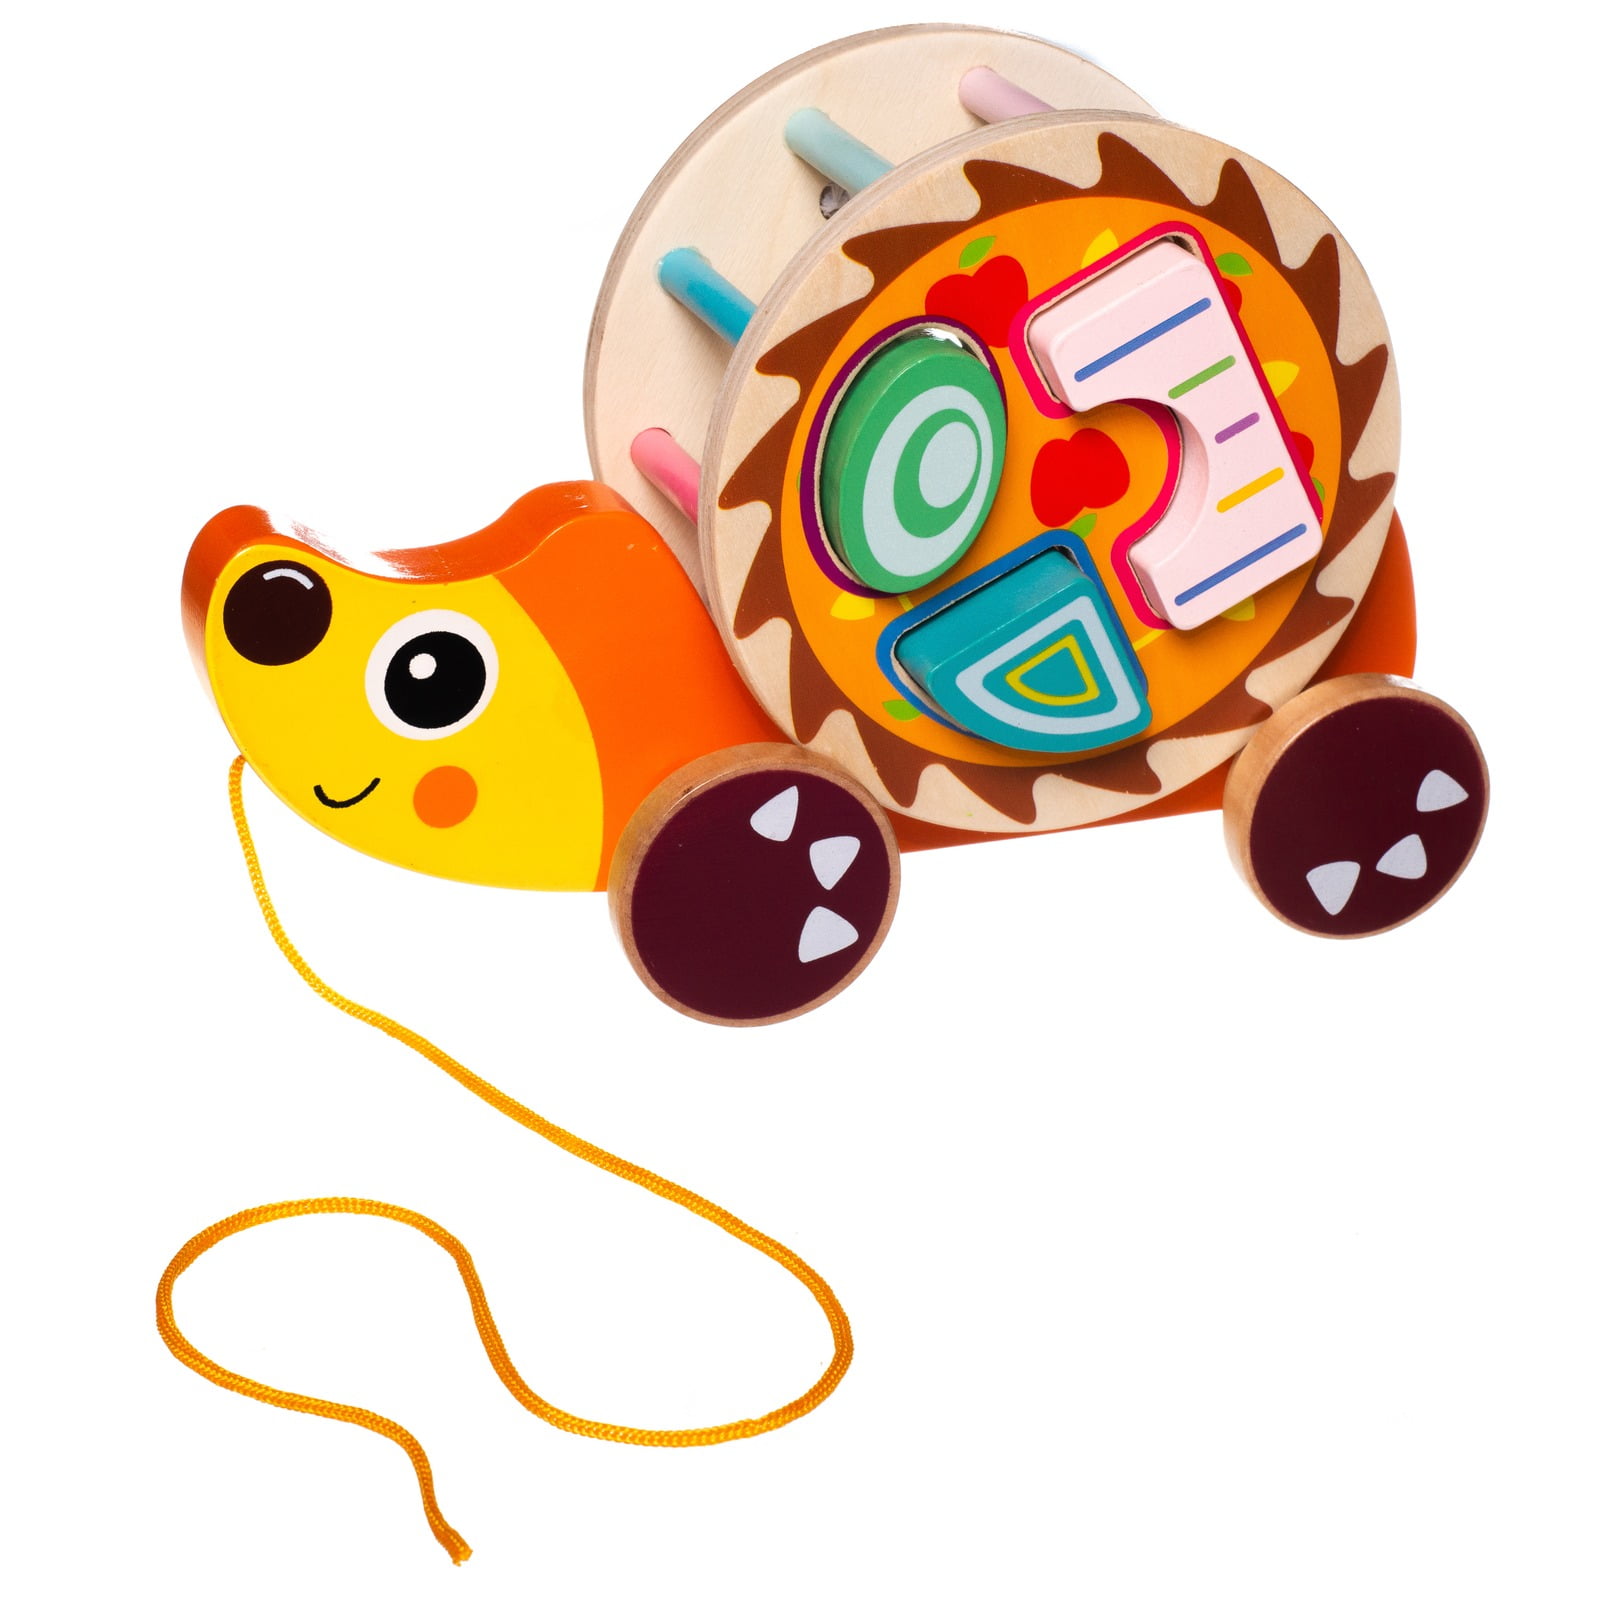 VTech Pull and Sing Puppy Get ready for Fun Best Toy 